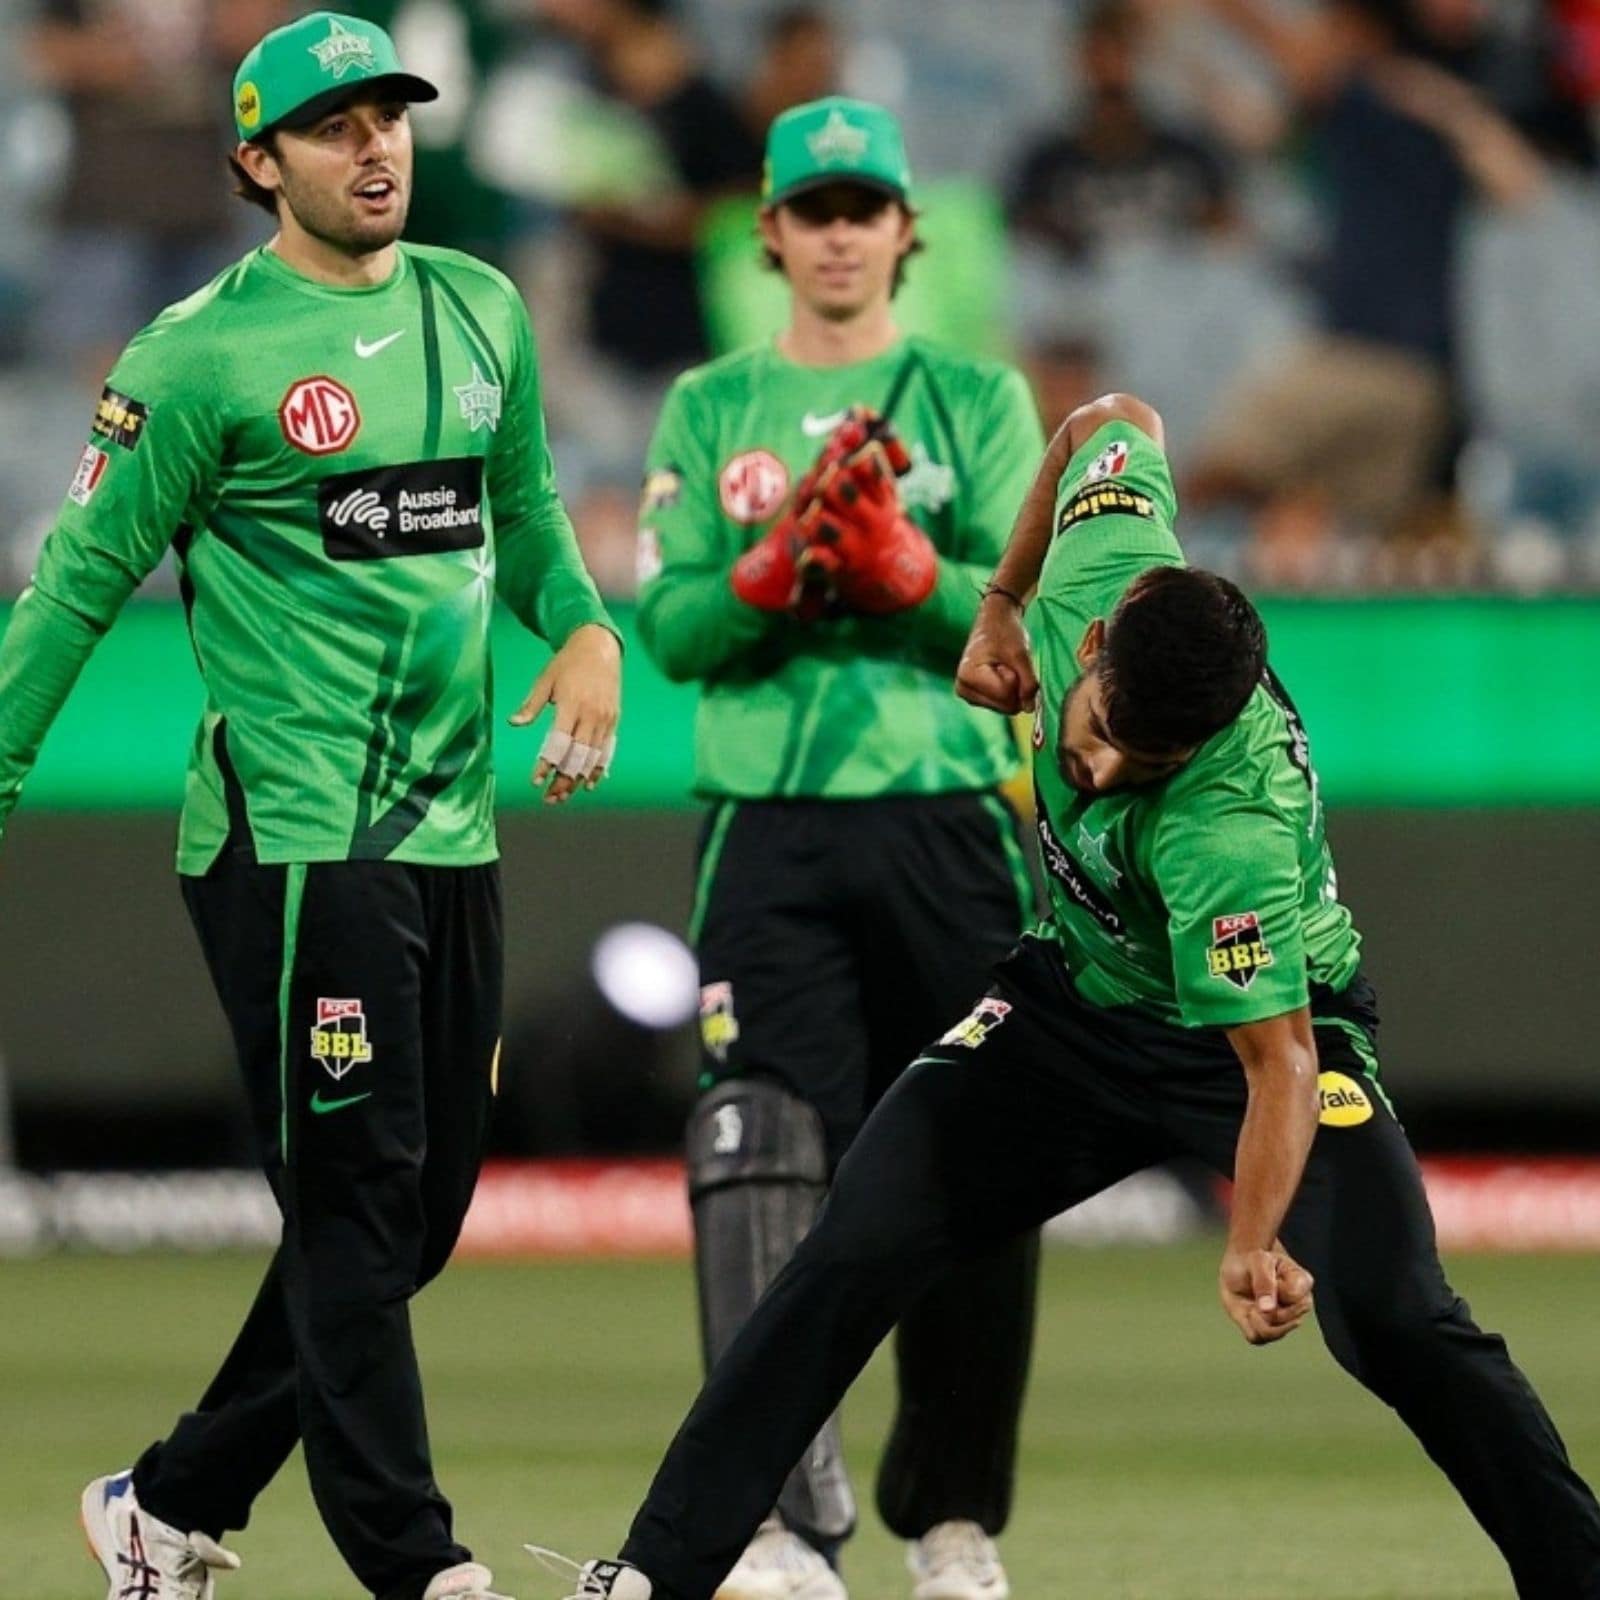 All Seven Big Bash Teams to Relocate to Melbourne